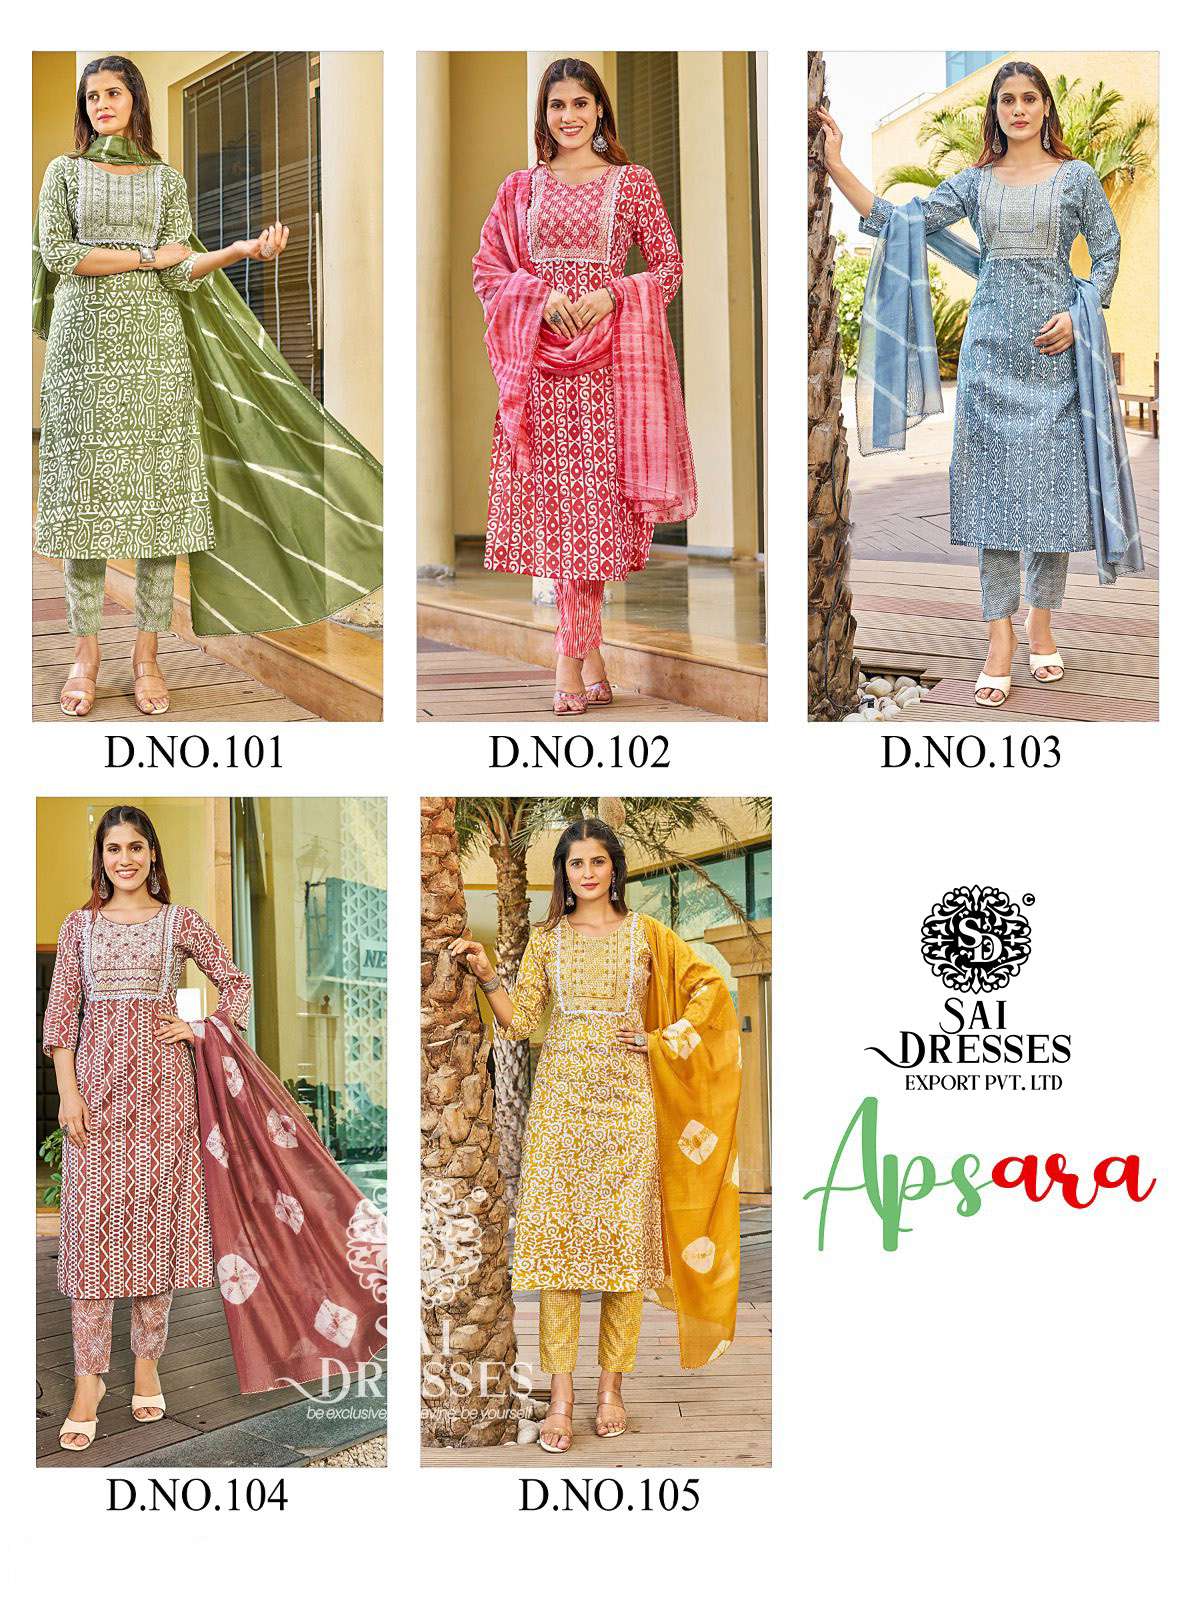 SAI DRESSES PRESENT APSARA READY TO WEAR PANT STYLE DESIGNER 3 PIECE SUITS IN WHOLESALE RATE IN SURAT